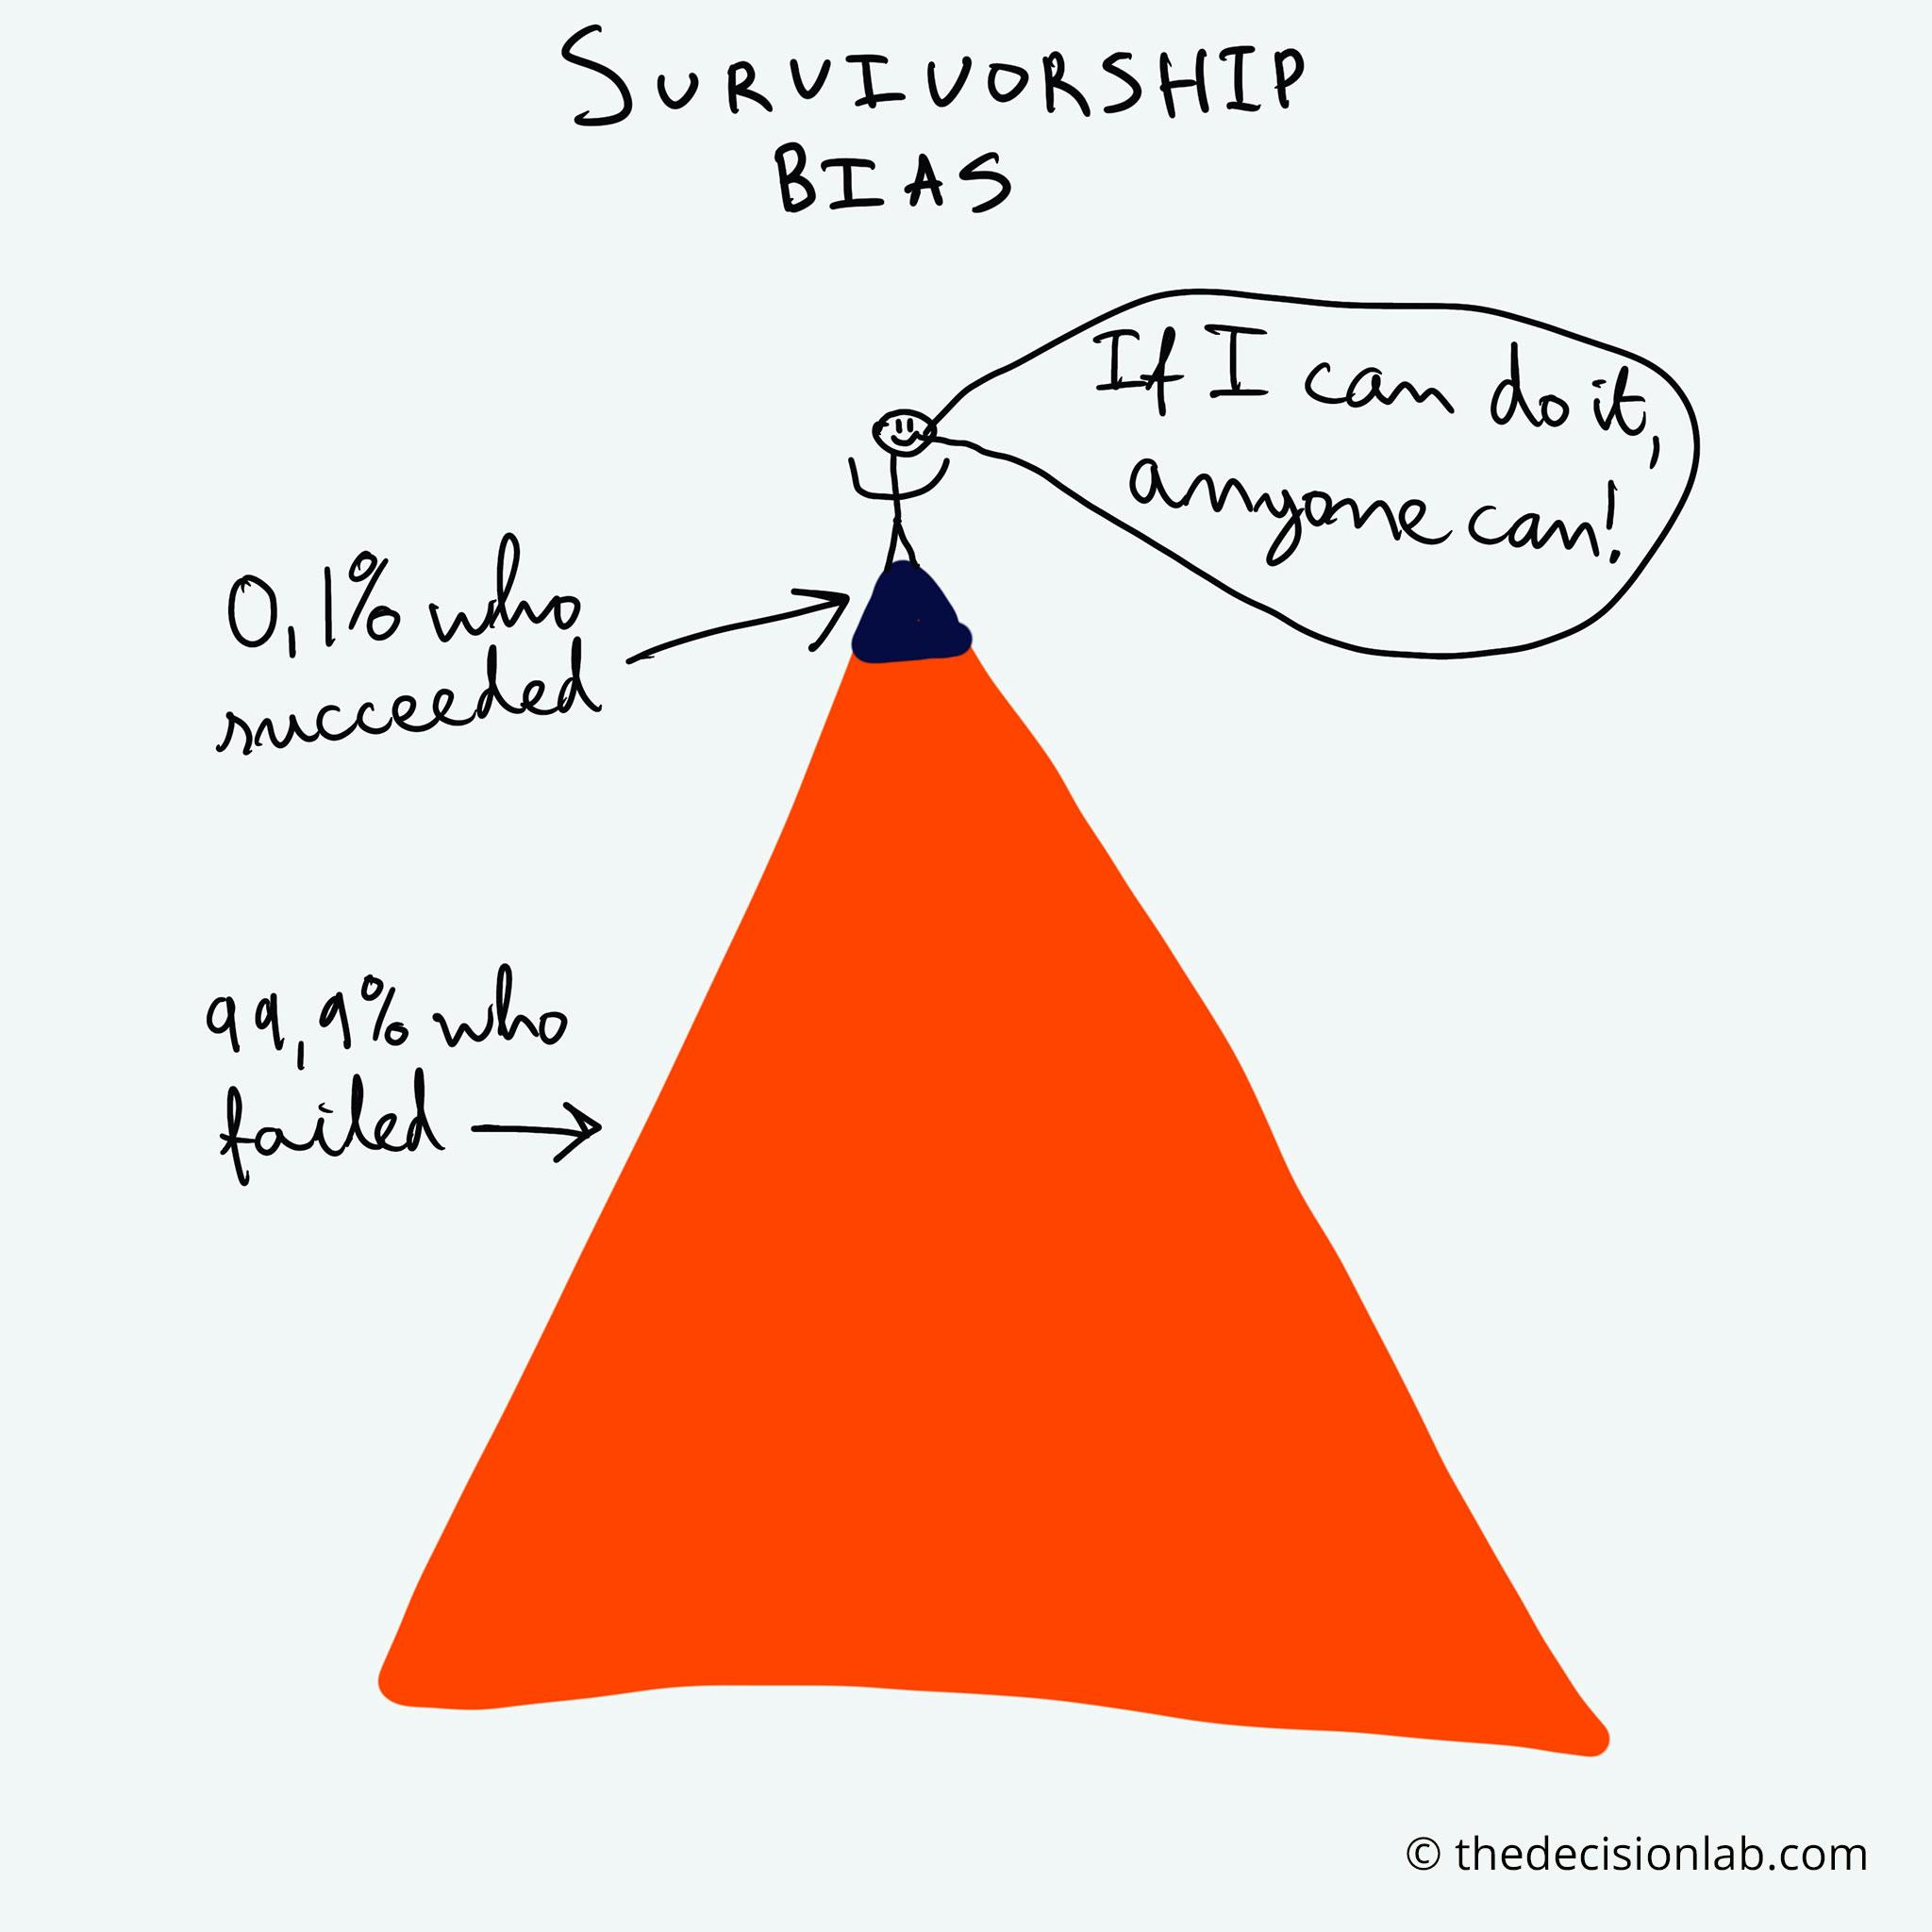 7 Lessons on Survivorship Bias that Will Help You Make Better